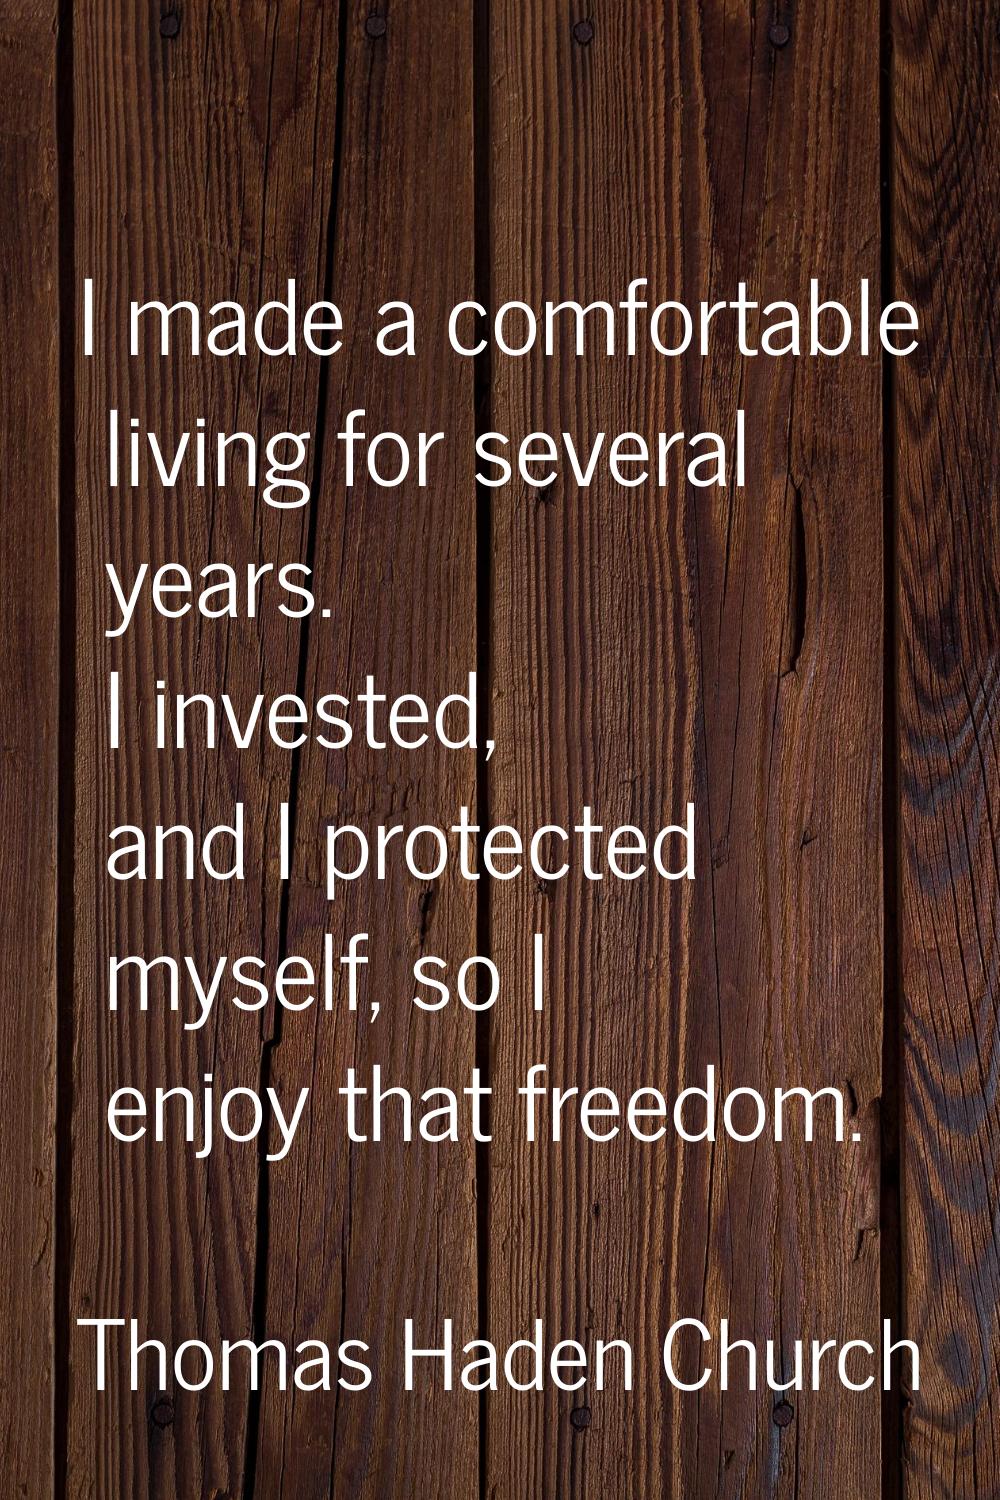 I made a comfortable living for several years. I invested, and I protected myself, so I enjoy that 